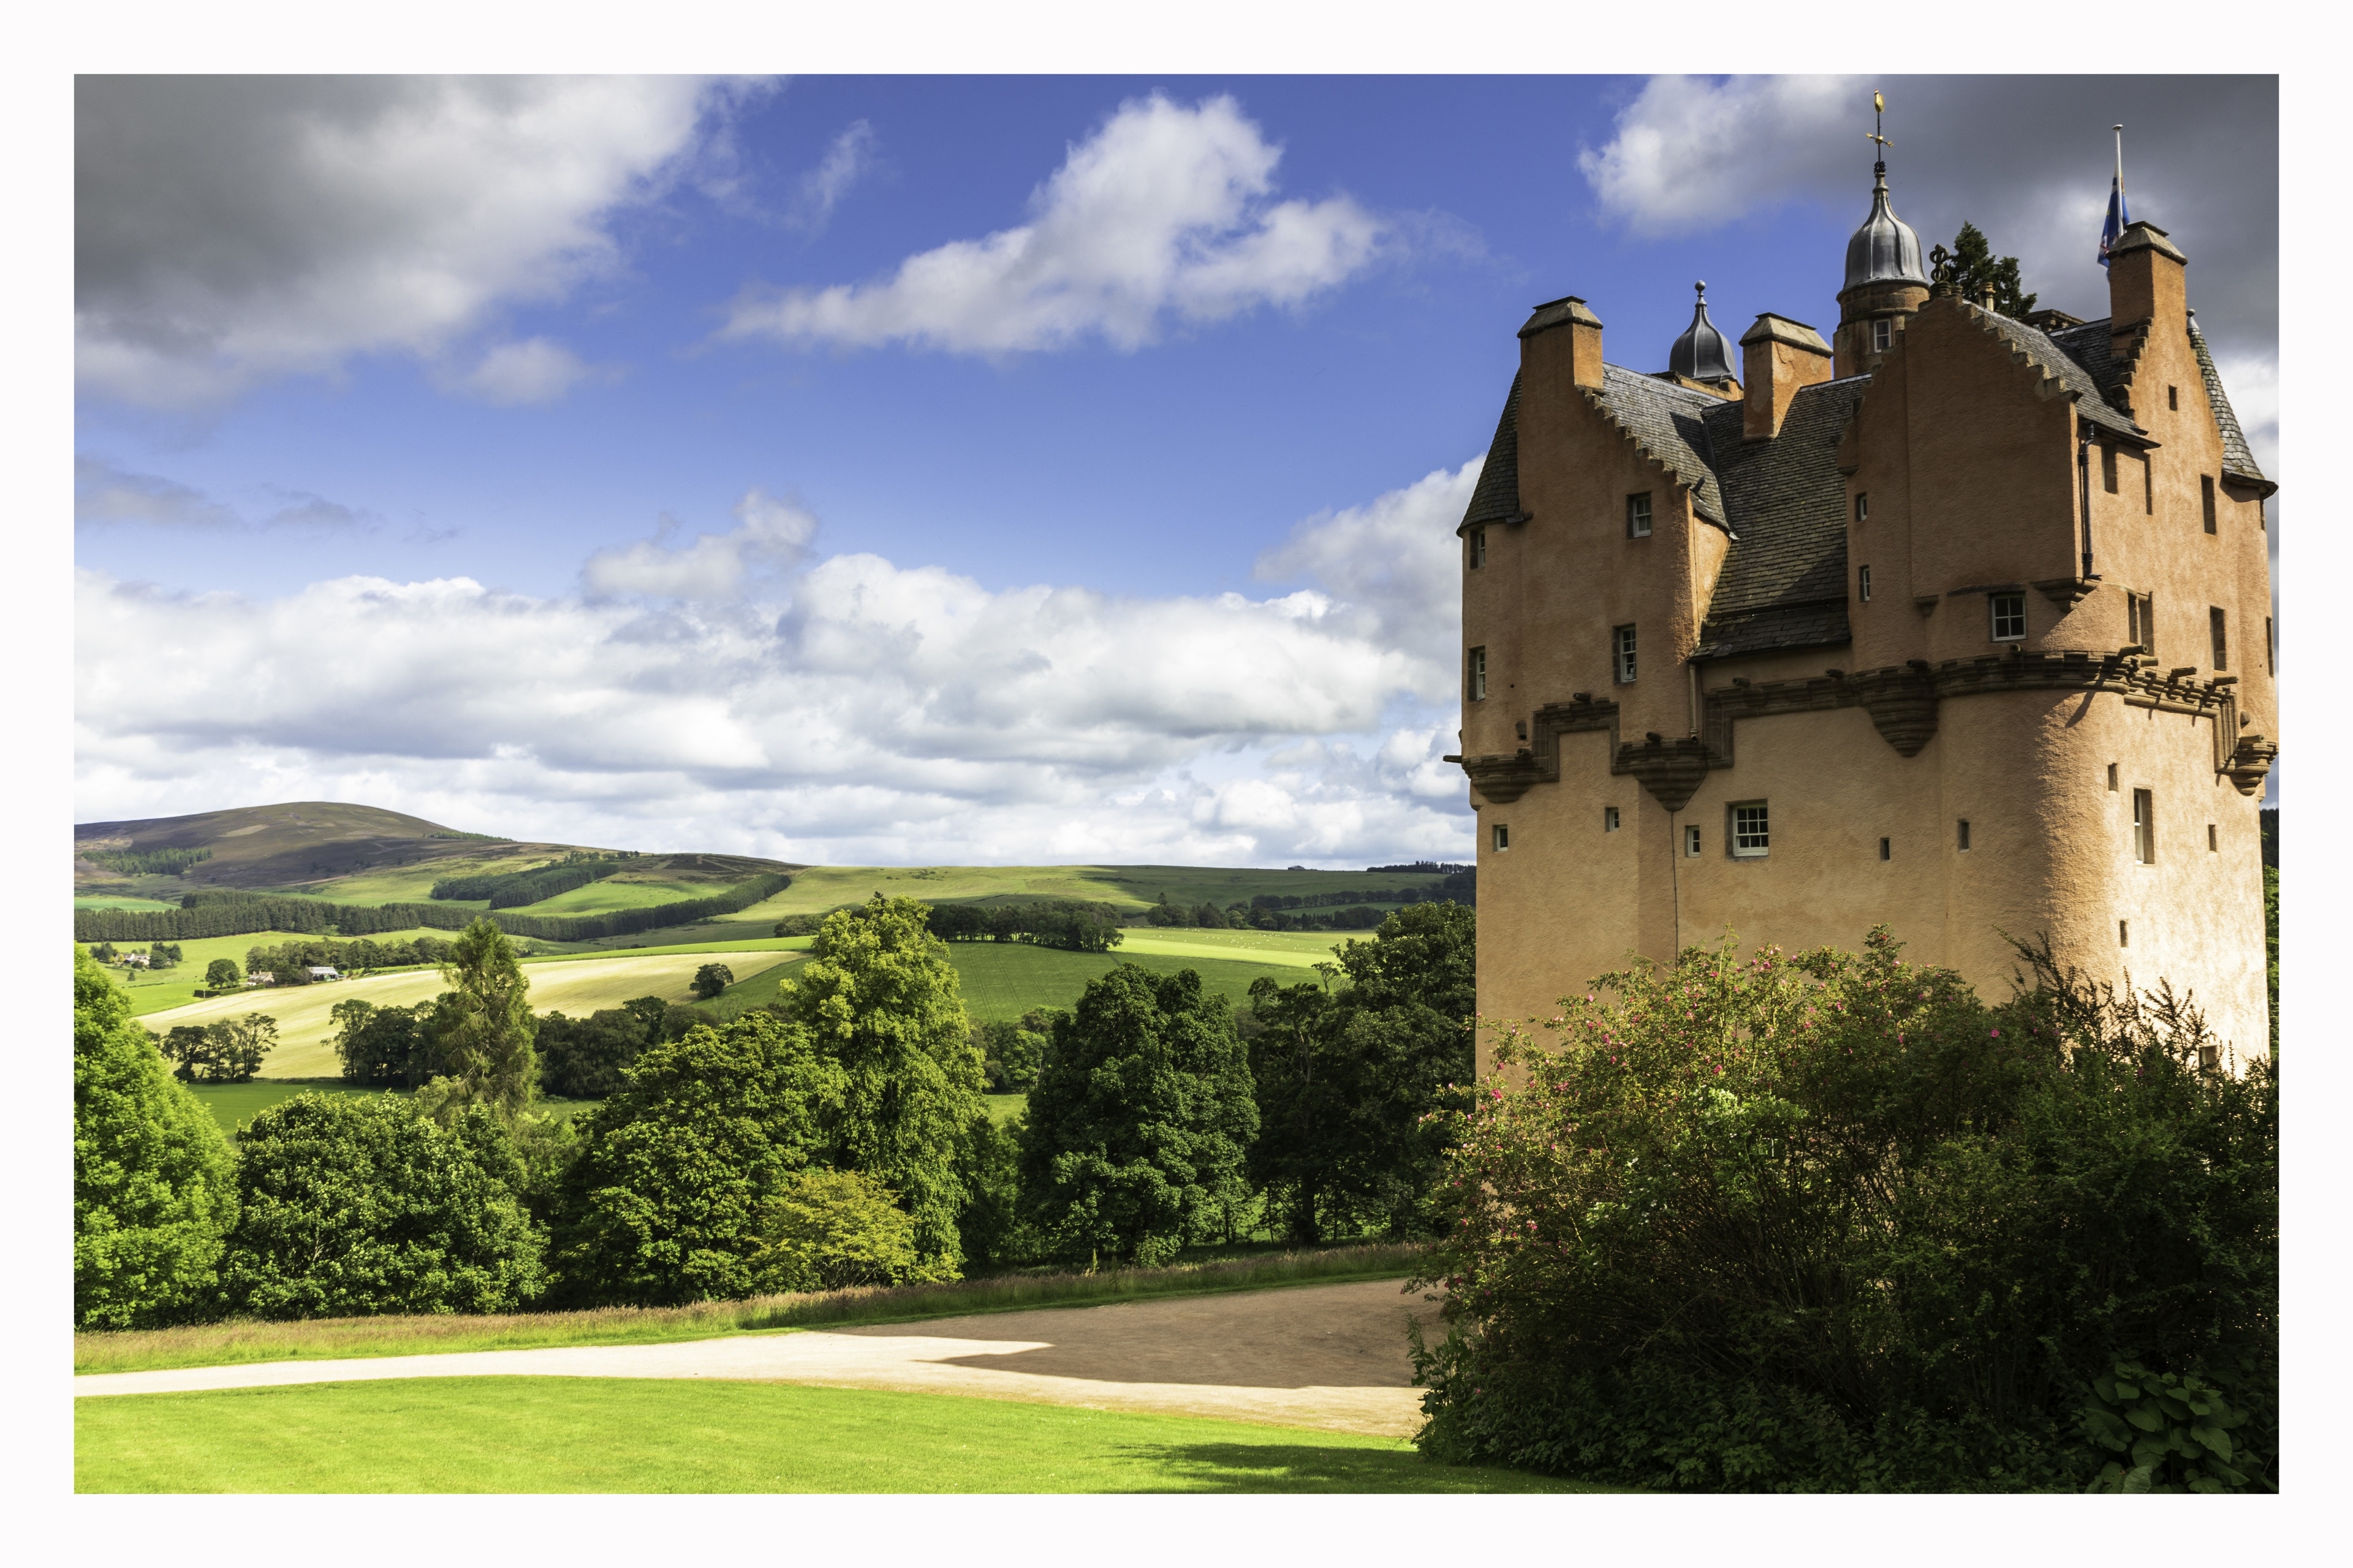 a beautiful and inspiring location with a fairytale castle.

the rolling hills of Aberdeen-shire show off the glamour of the castle